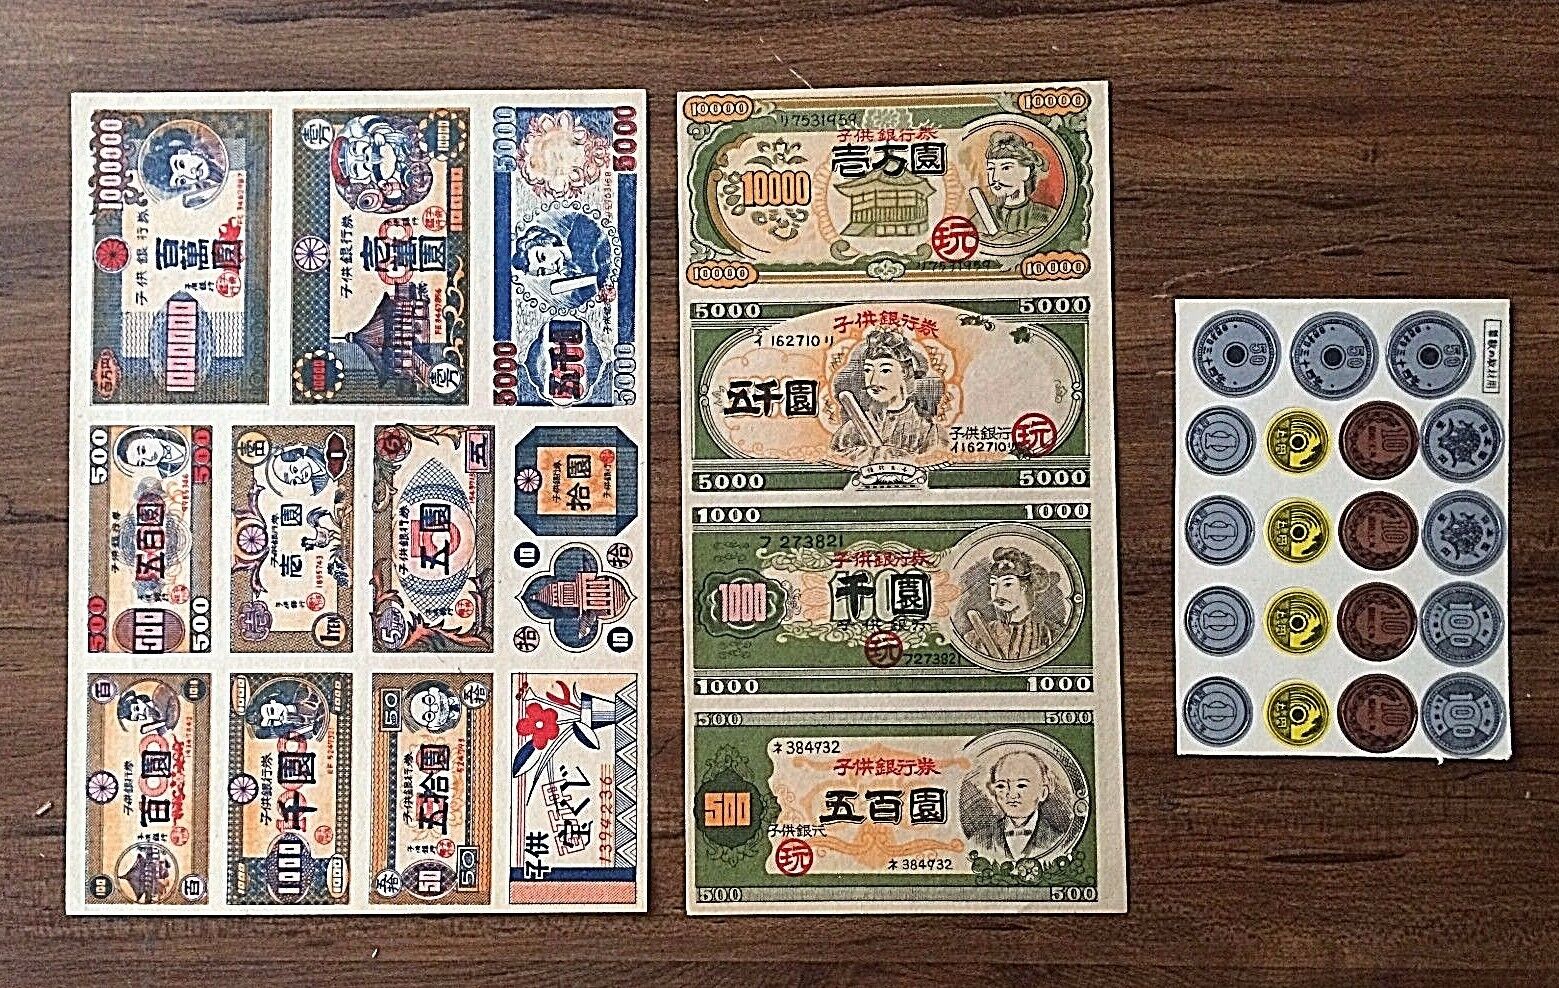 JAPAN CHILDREN'S LEARNING PLAY MONEY COMPLETE MINT CONDITION FULL SHEETS + COINS